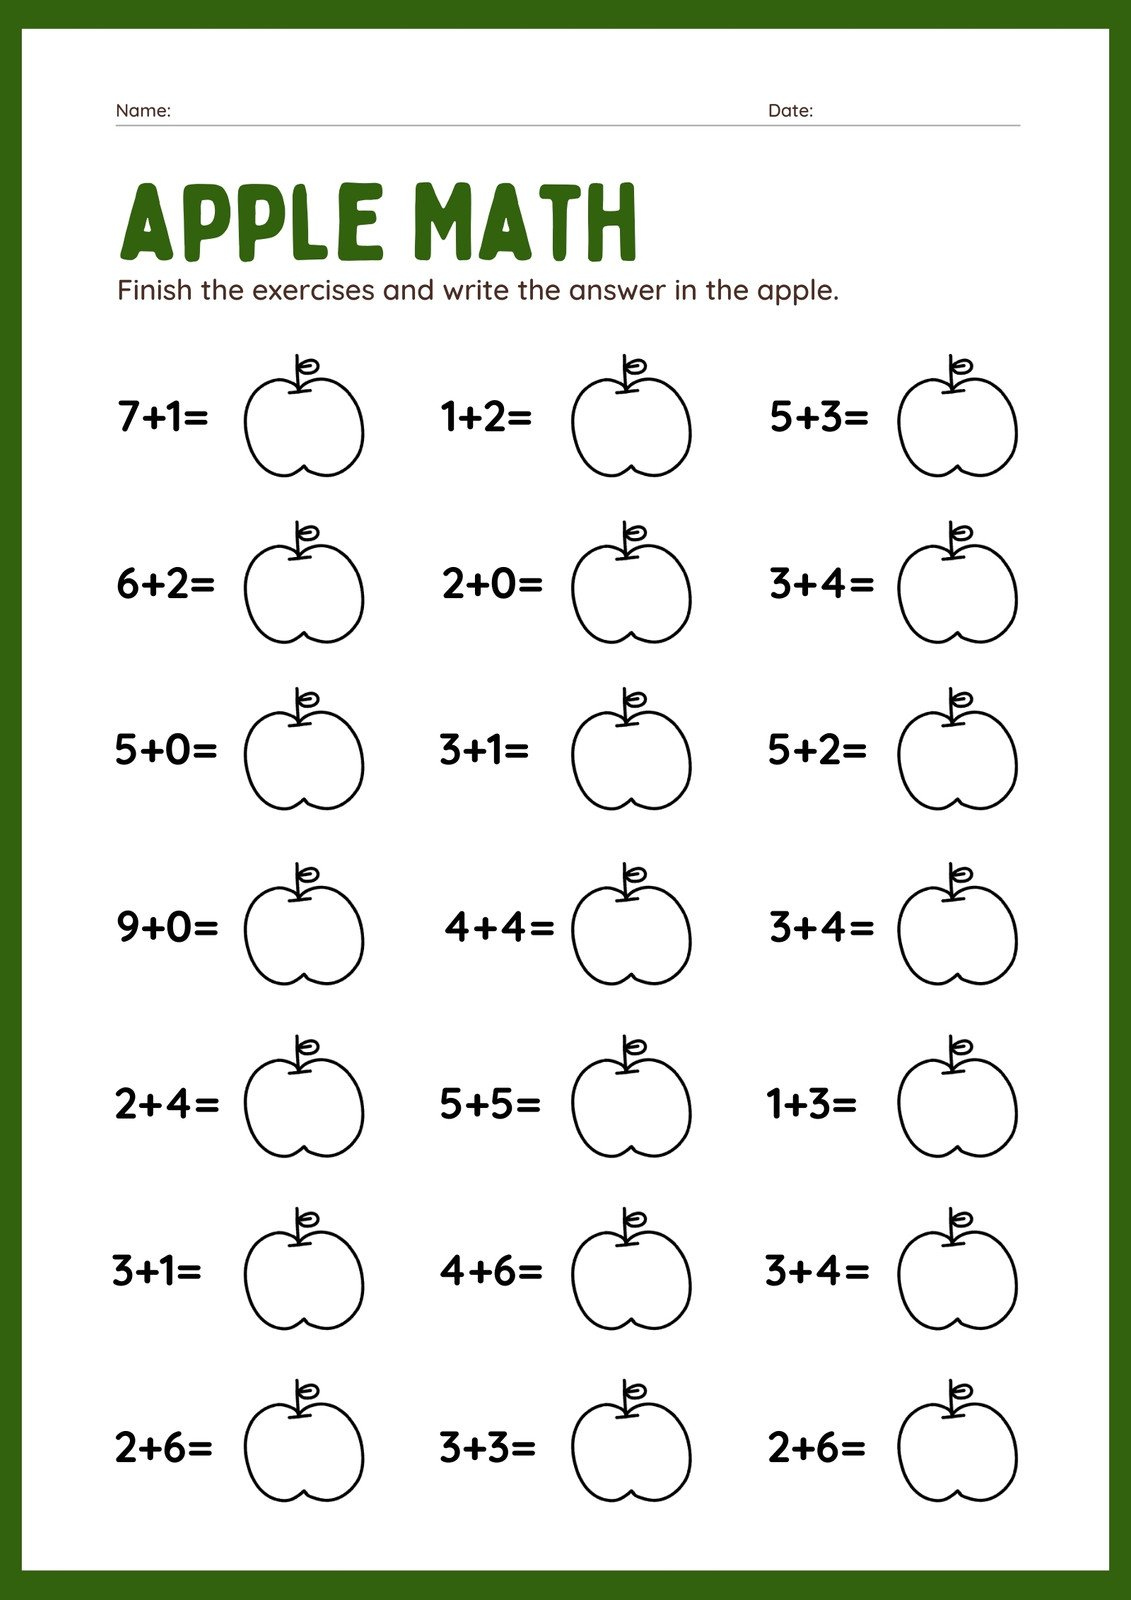 Free 1St Grade Math Worksheet Templates To Customize | Canva intended for Free Printable First Grade Math Worksheets